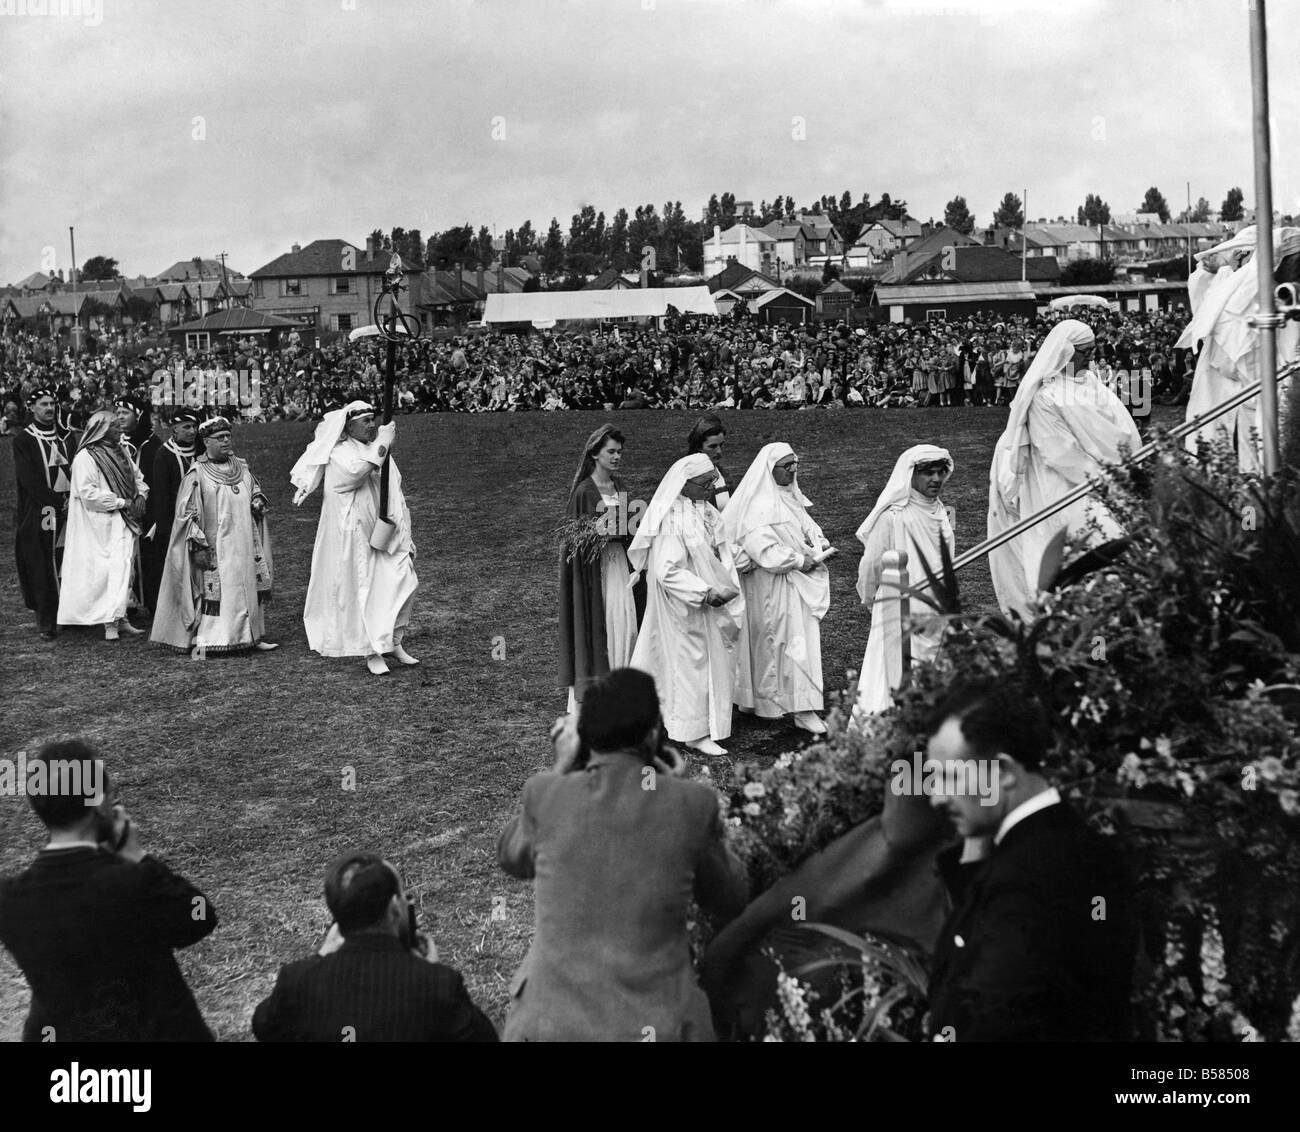 Royal Visit to North Wales: The Bardic procession enters the National Eisteddfod Pavilion to await H.M. The Queen. Behind the Sword Bearer on the left is Cynin The Arch Druid. July 1953 P005524 Stock Photo